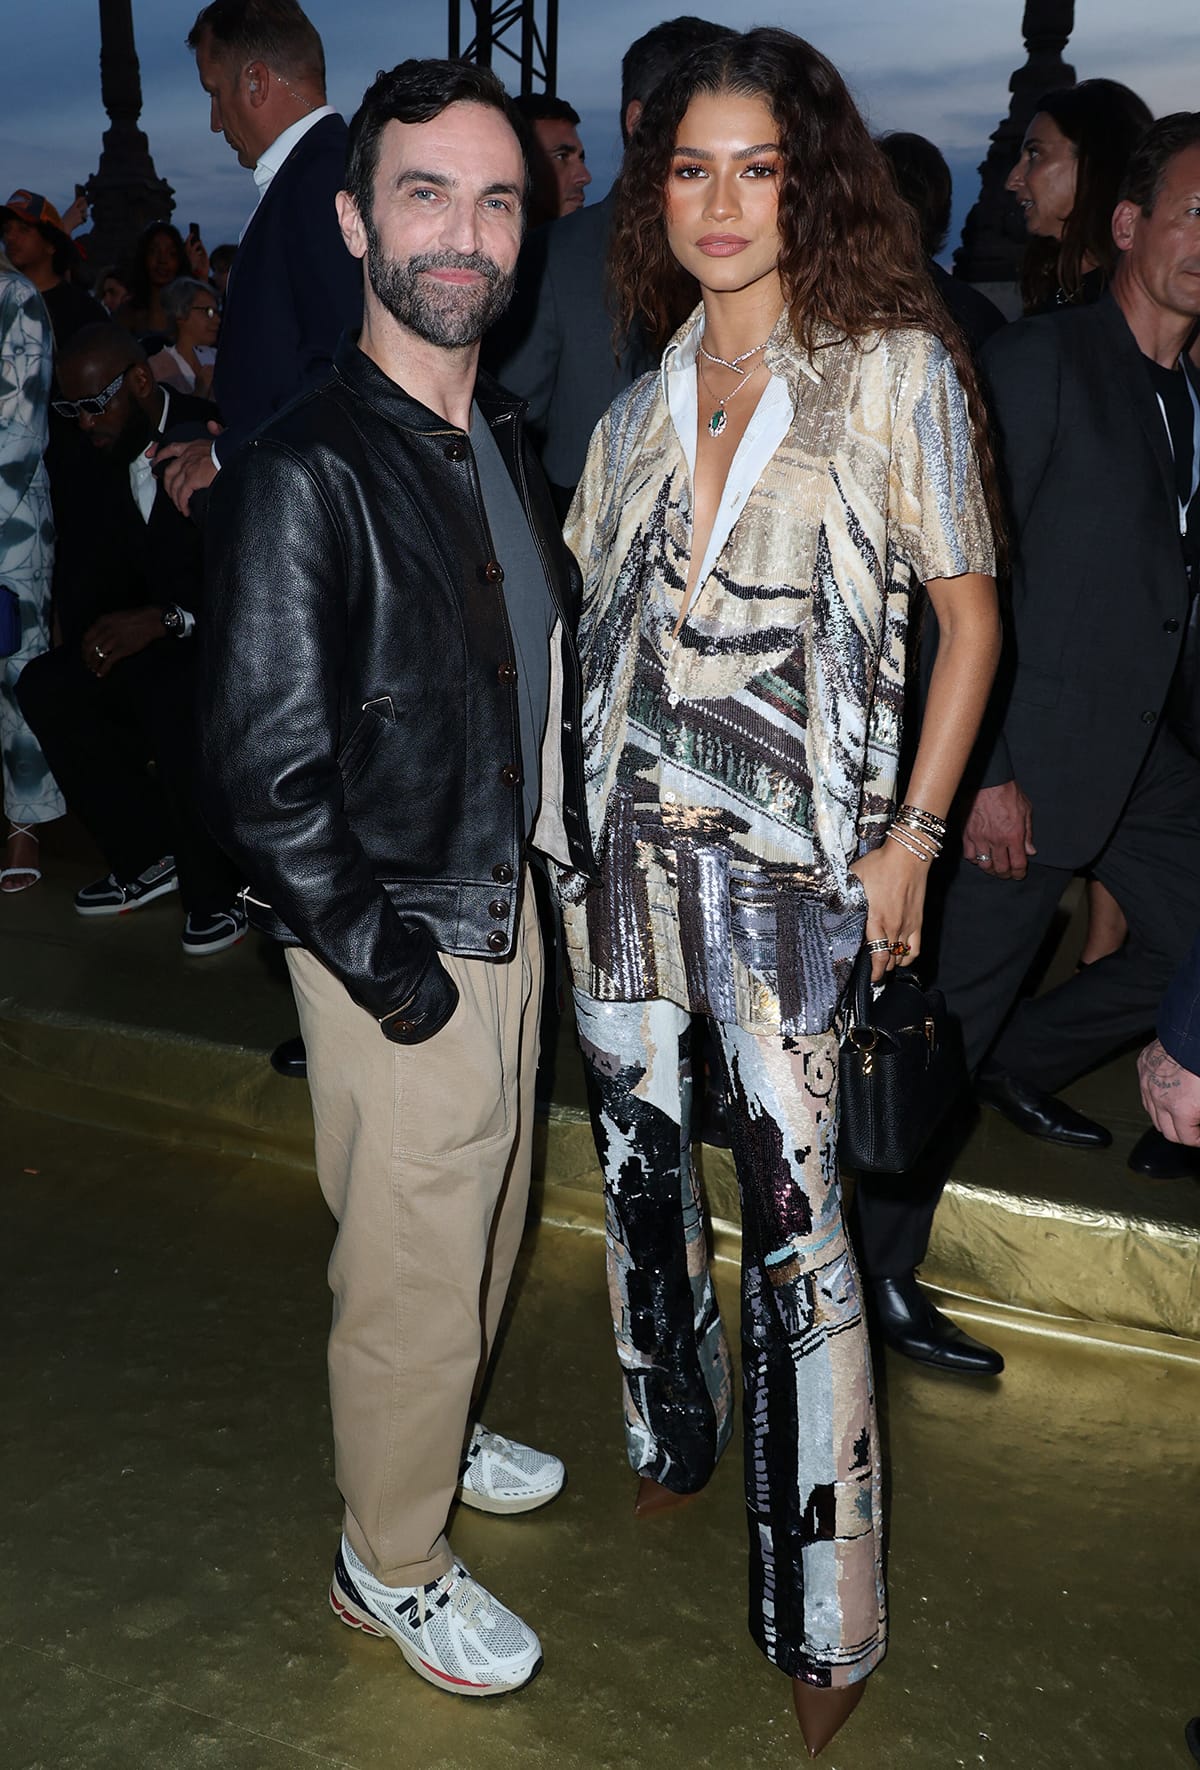 Louis Vuitton's women's creative director Nicolas Ghesquiere and actress Zendaya at the Paris Fashion Week for Pharrell Williams' debut Menswear Spring/Summer 2024 collection for Louis Vuitton held at Paris’ Pont Neuf on June 20, 2023